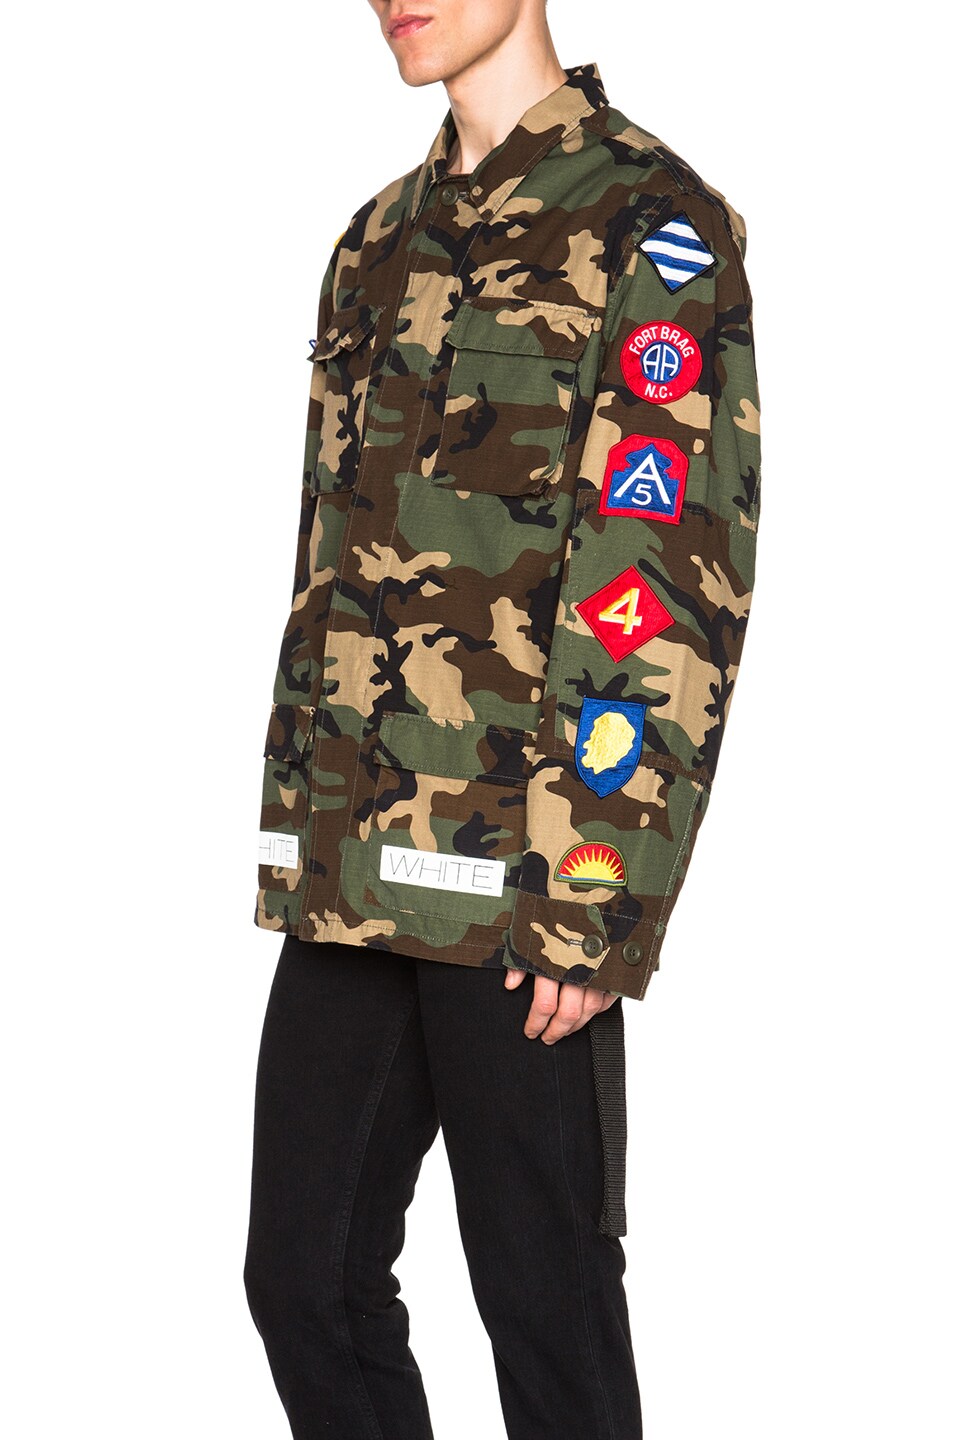 OFF-WHITE Sahariana Jacket with Patches in Camouflage | FWRD